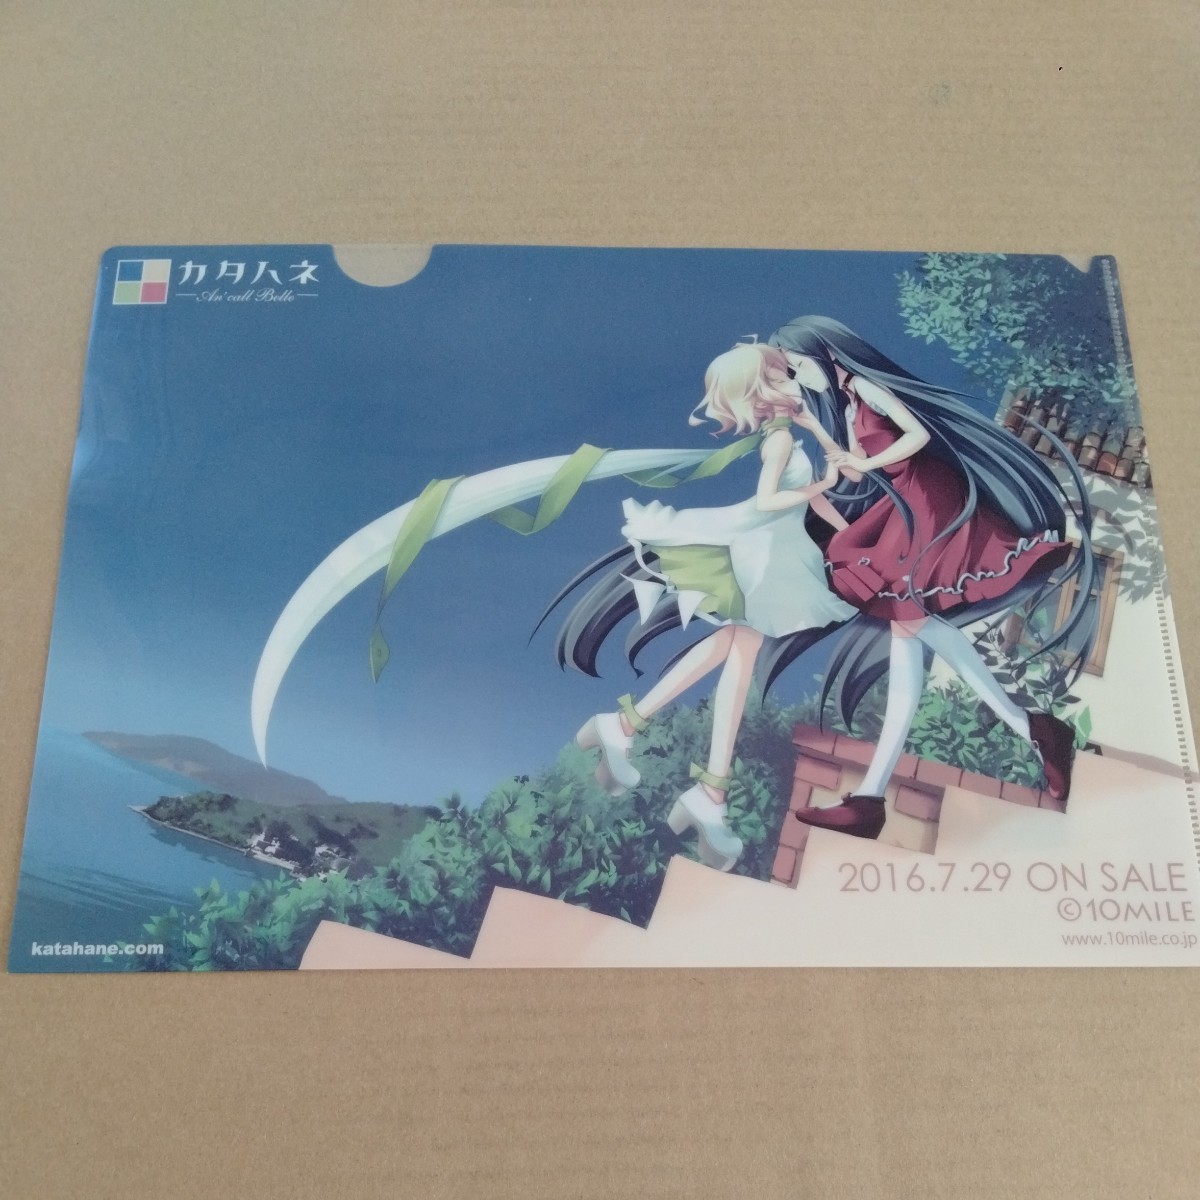 Katahane and 'Call Belle Event Distribution Clear File 10mile